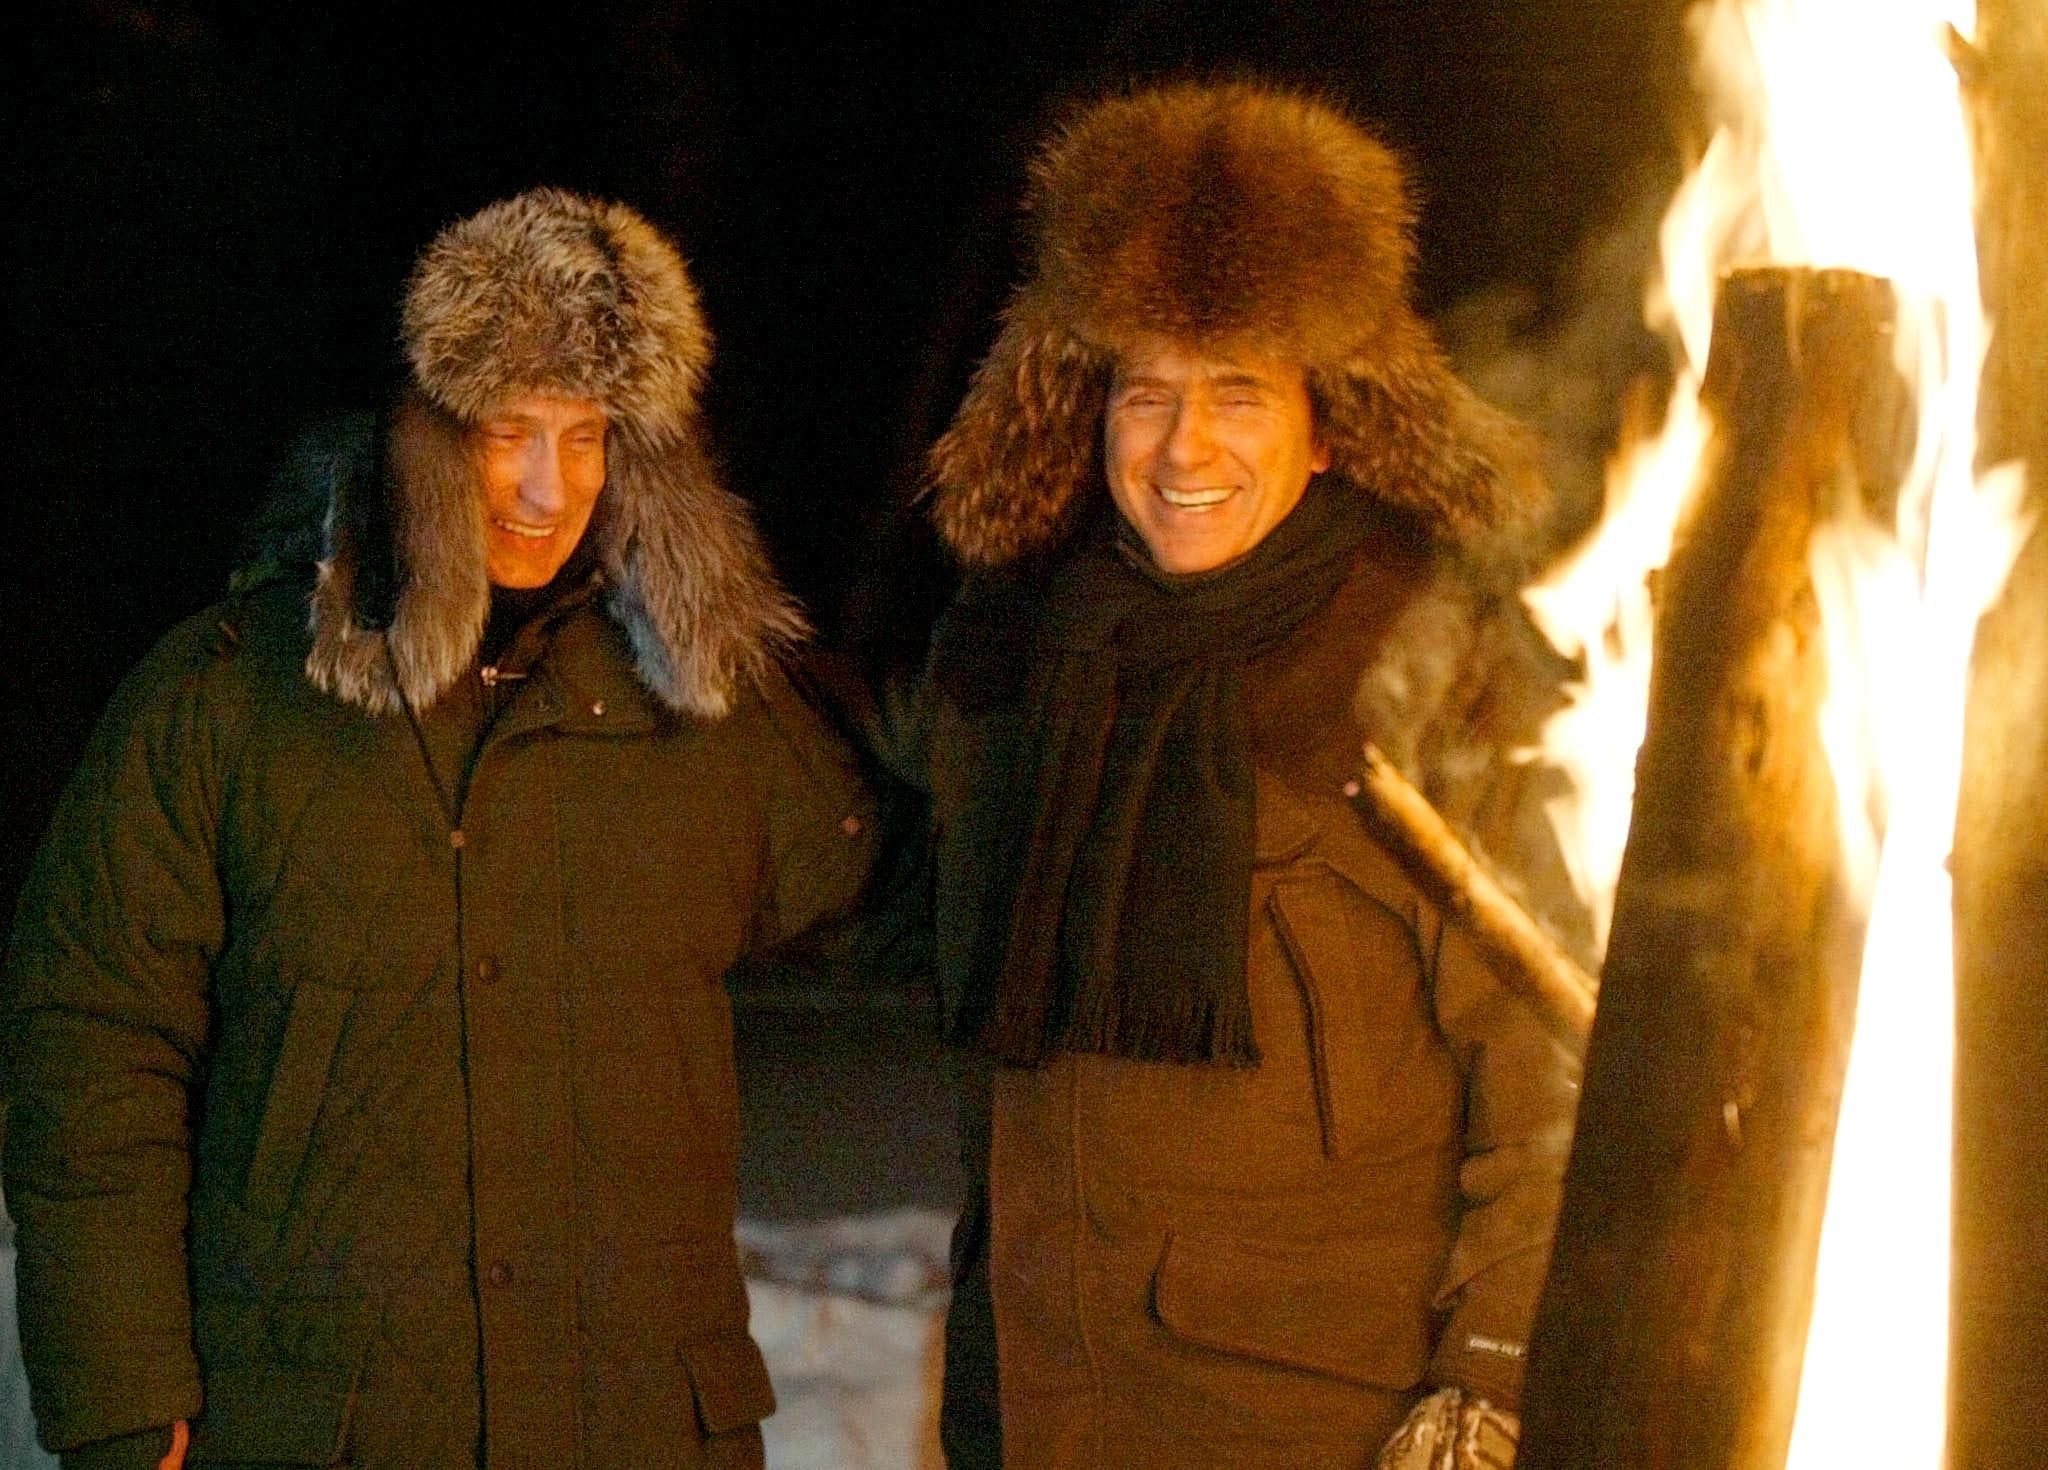 Russian President Vladimir Putin and Italian Prime Minister Silvio Berlusconi smile as they stand near a huge fire in a wildlife preserve and recreation area near a residence of Zavidovo, north-west of Moscow in February, 2003